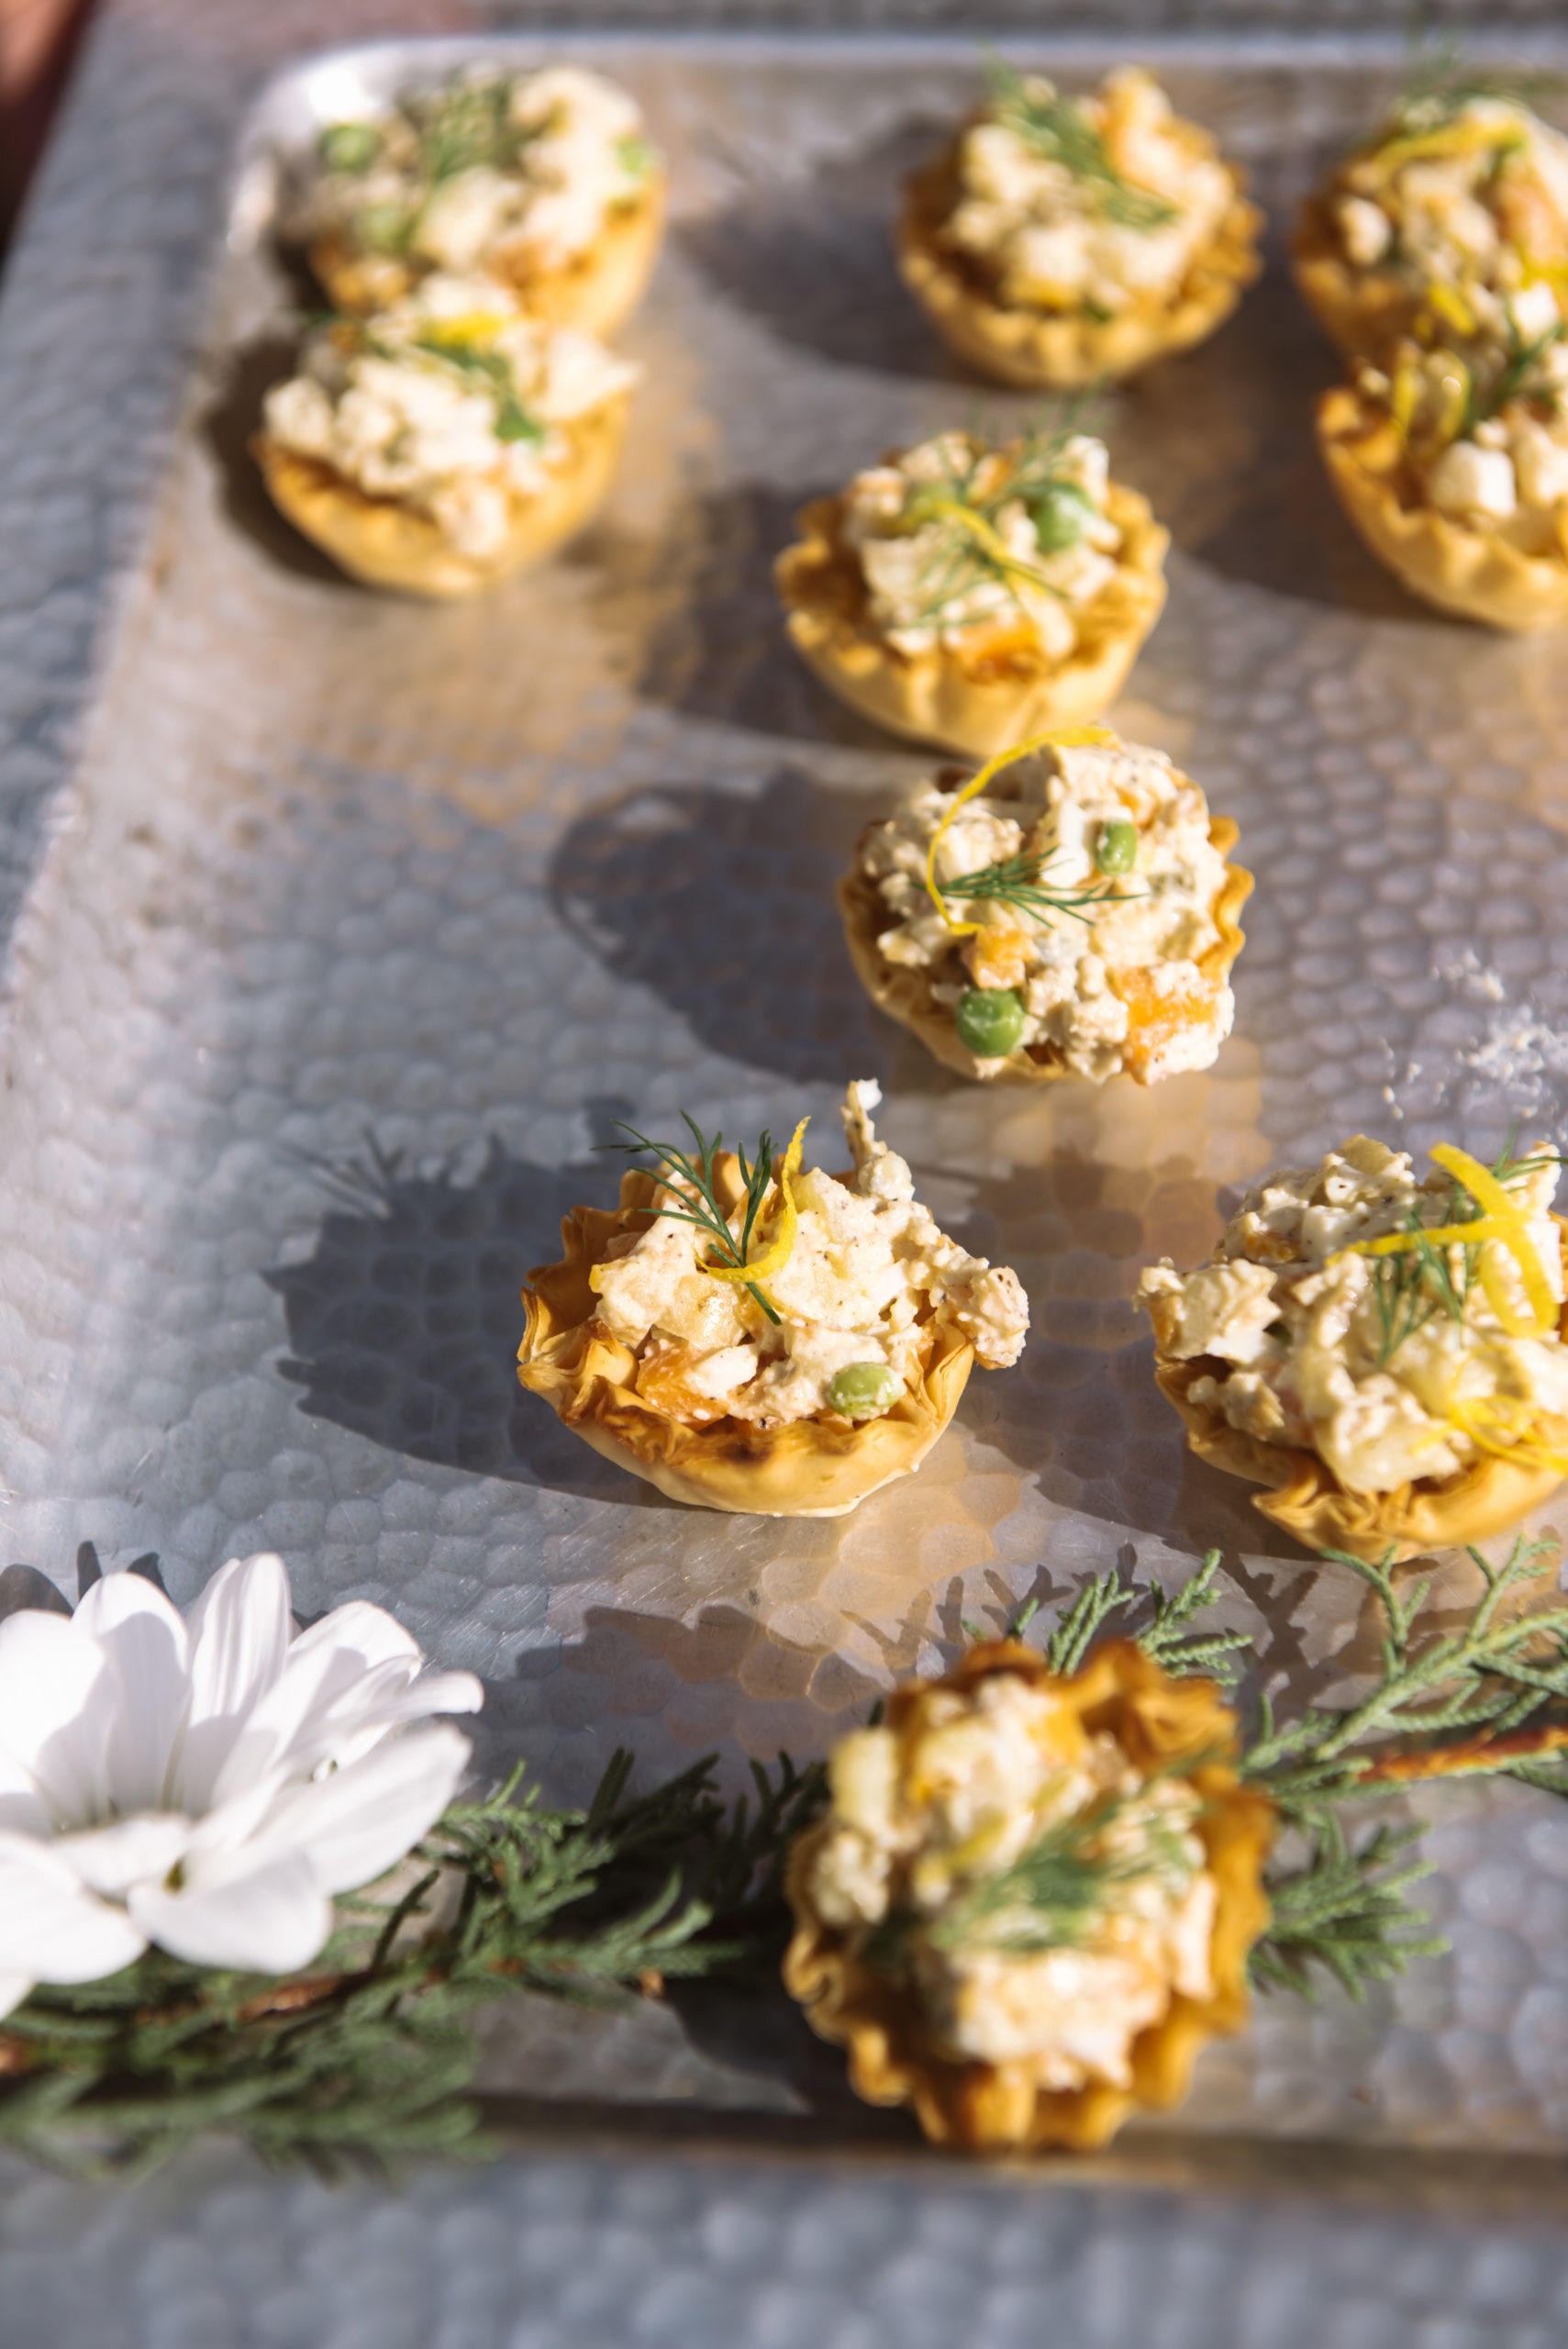 Close up of some hors d'oeuvres served during cocktail hour on a silver platter. They are mini crusts filled with a spread and herbs.